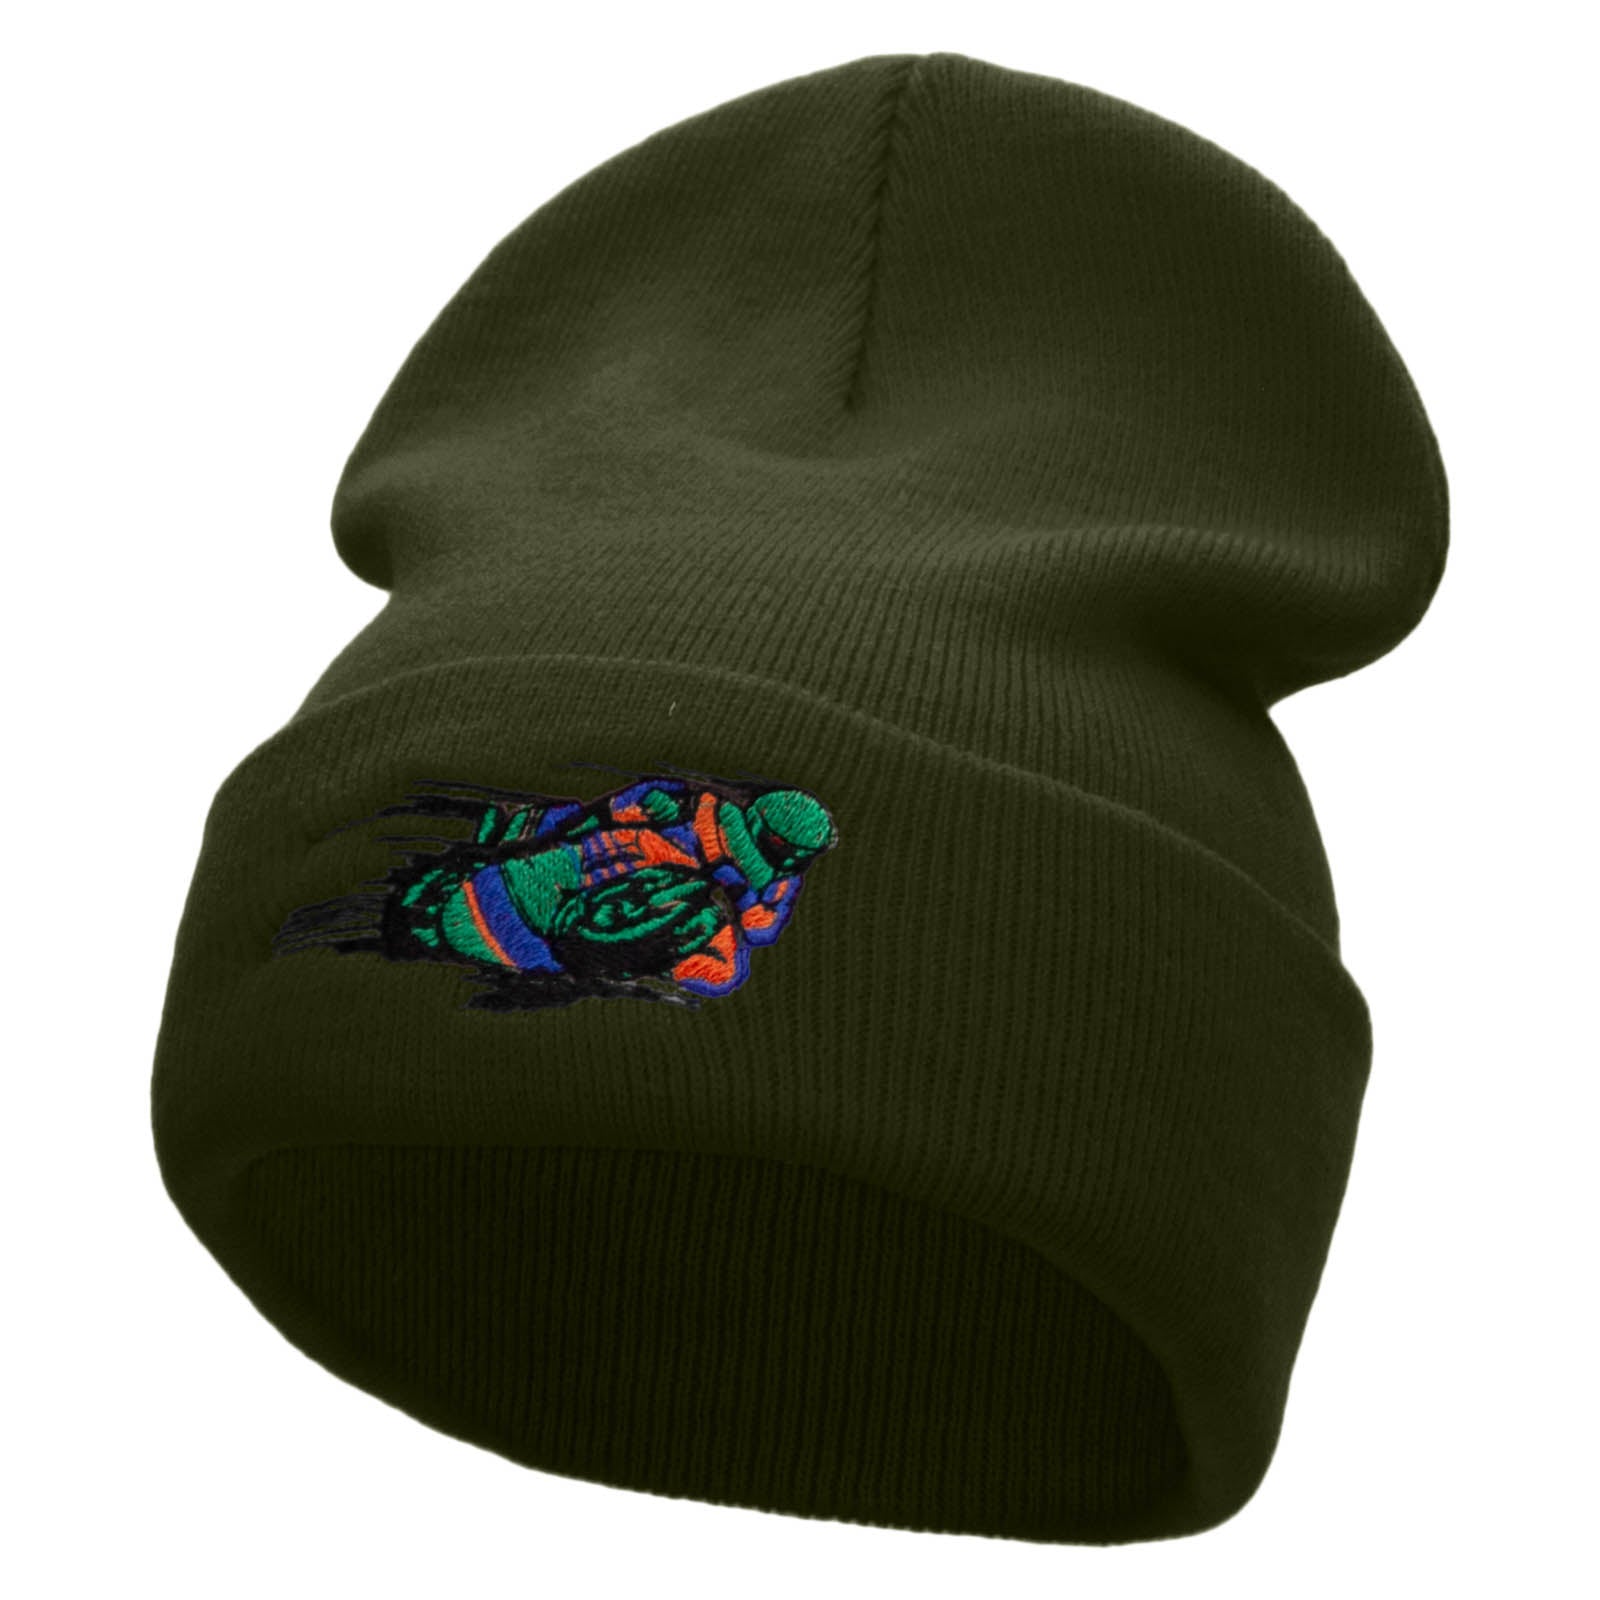 Moto Racer Embroidered 12 Inch Long Knitted Beanie - Olive OSFM